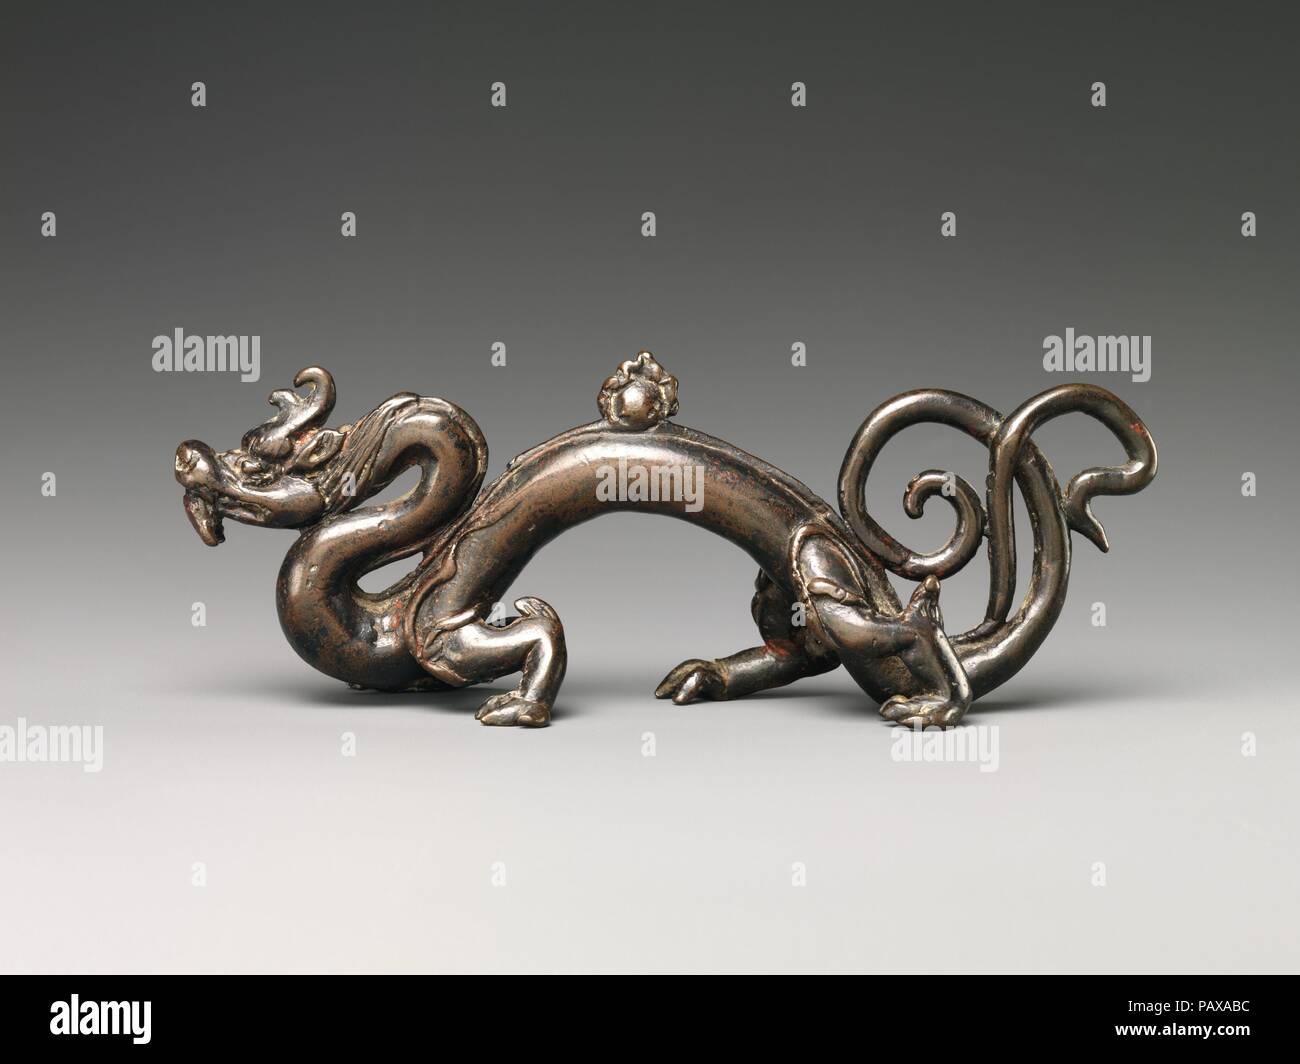 Brush Rest in the Form of a Dragon. Culture: China. Dimensions: H. 2 1/8 in. (5.4 cm); W. 6 7/8 in. (17.5 cm); D. 1 1/2 in. (3.8 cm). Date: 15th century.  A rare example of 15th century Ming bronze work, this brush rest was cast in the form of a sinuous dragon crouching on its four powerful paws with a 'flaming pearl' on its arched back. It is further distinguished by two curved horns and a bifurcated tail that coils and unfurls. Its neck, body, and tail all provide places for resting writing brushes. More than a functional object, this brush rest is an imaginative and auspicious sculpture des Stock Photo